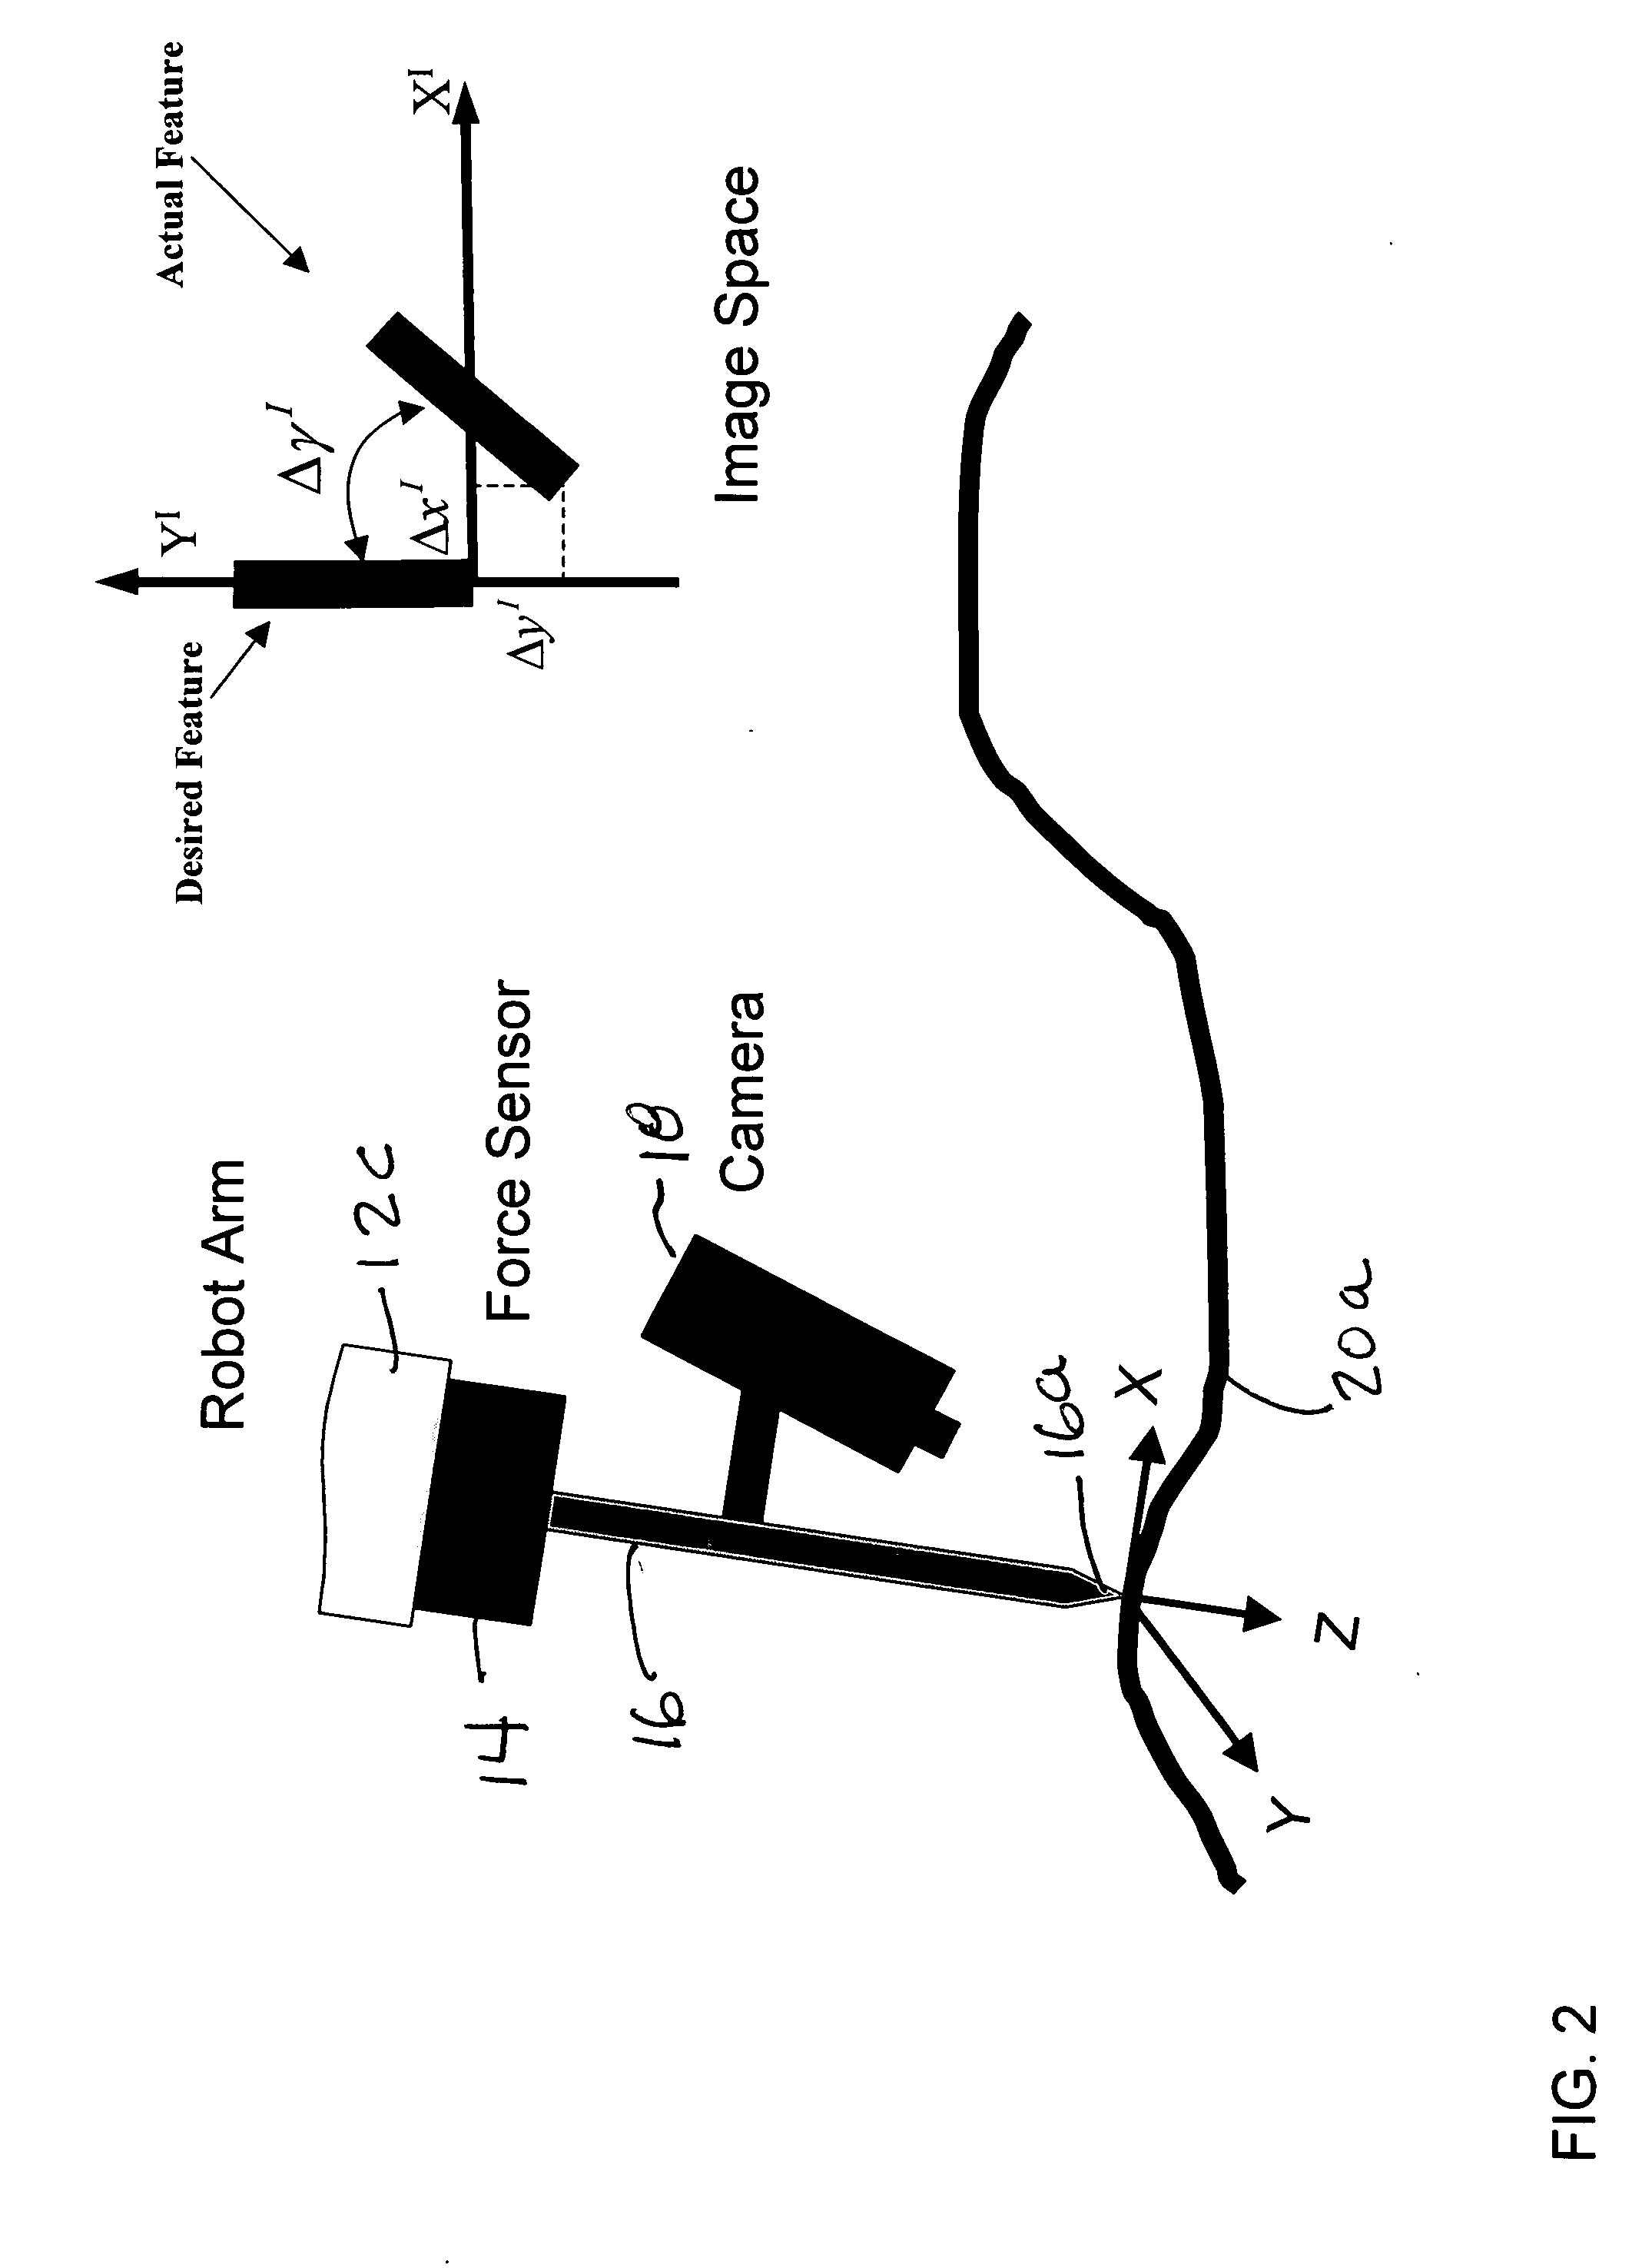 Robot programming method and apparatus with both vision and force